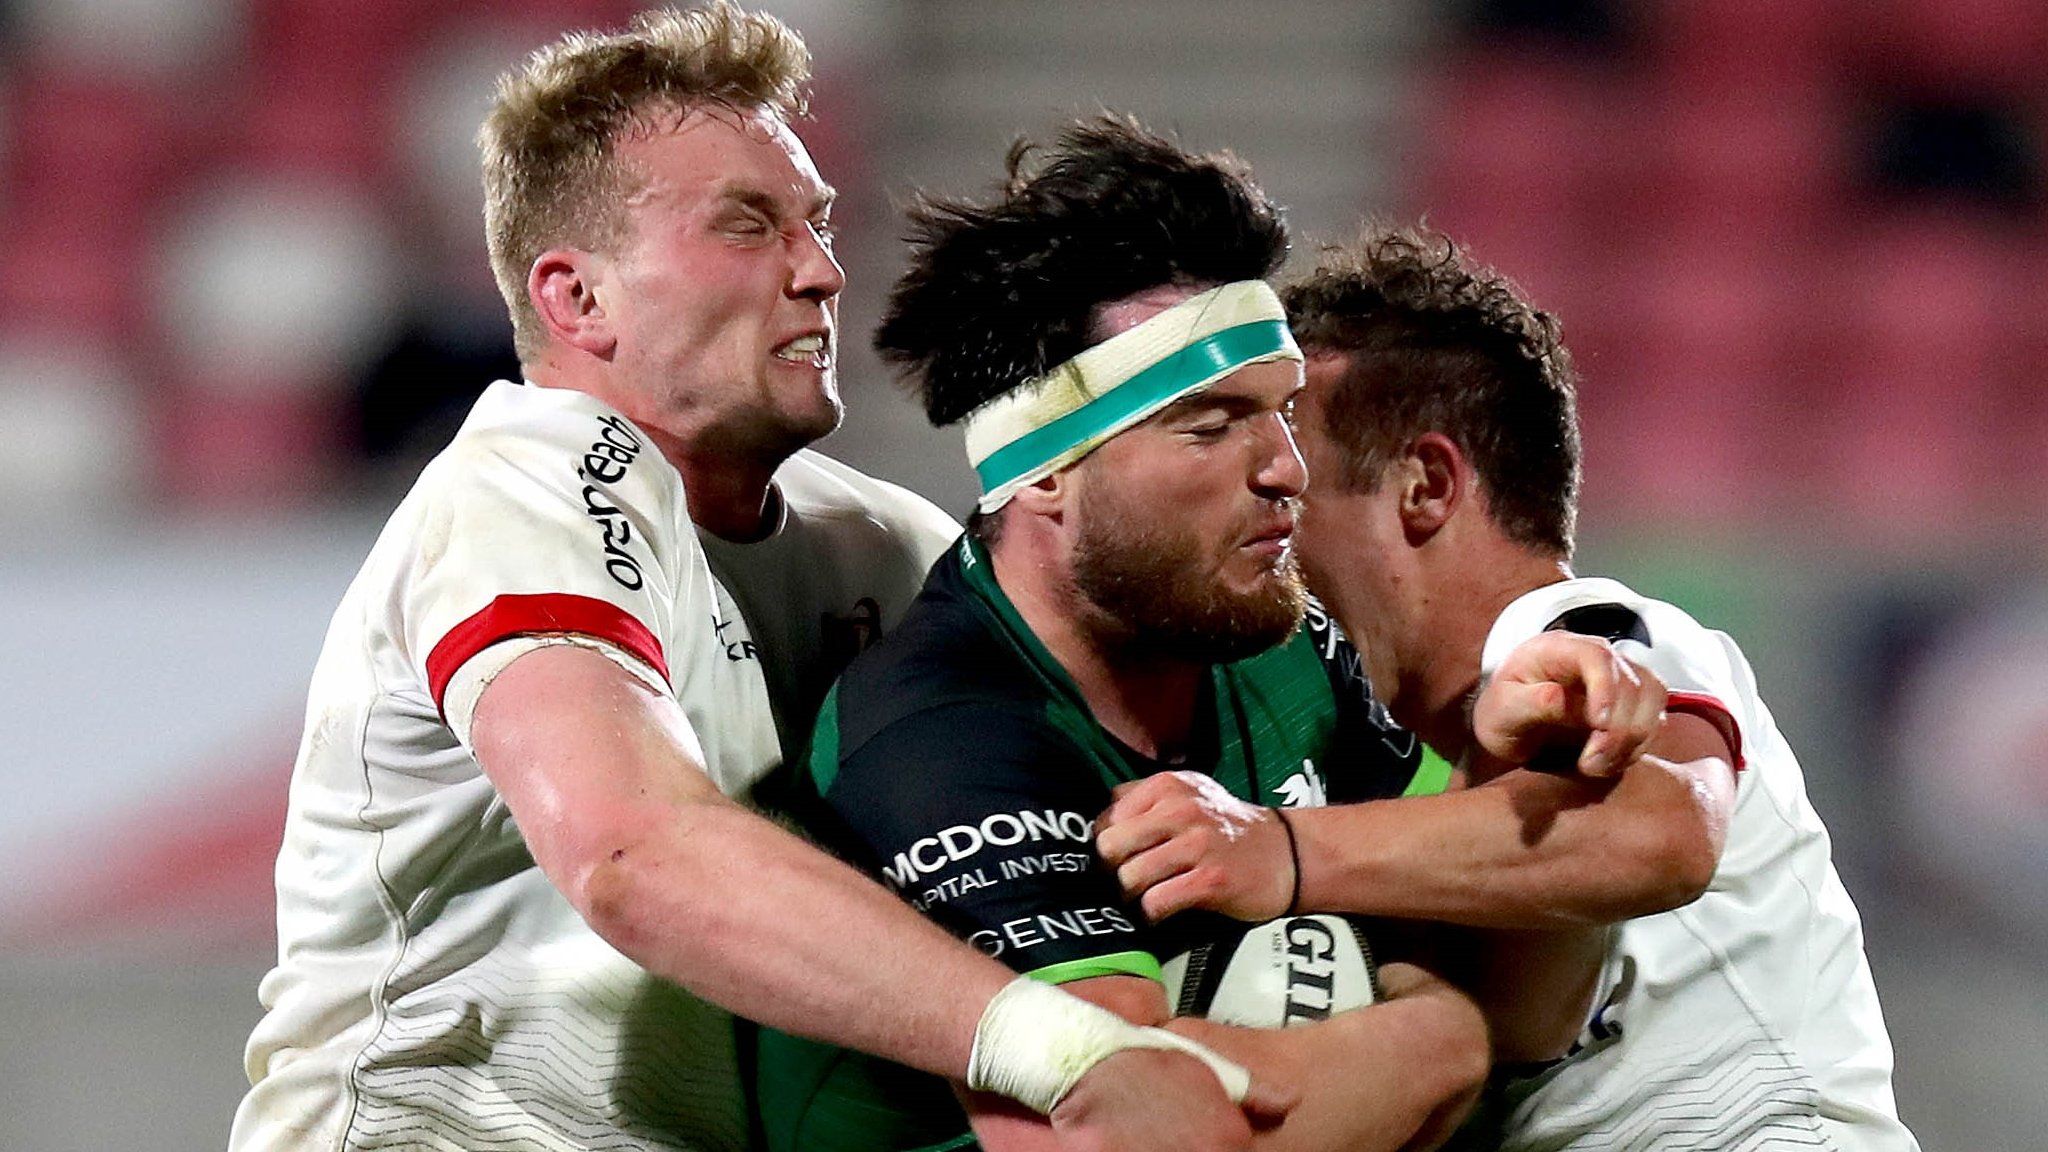 Ulster face Connacht in Belfast on Boxing Day